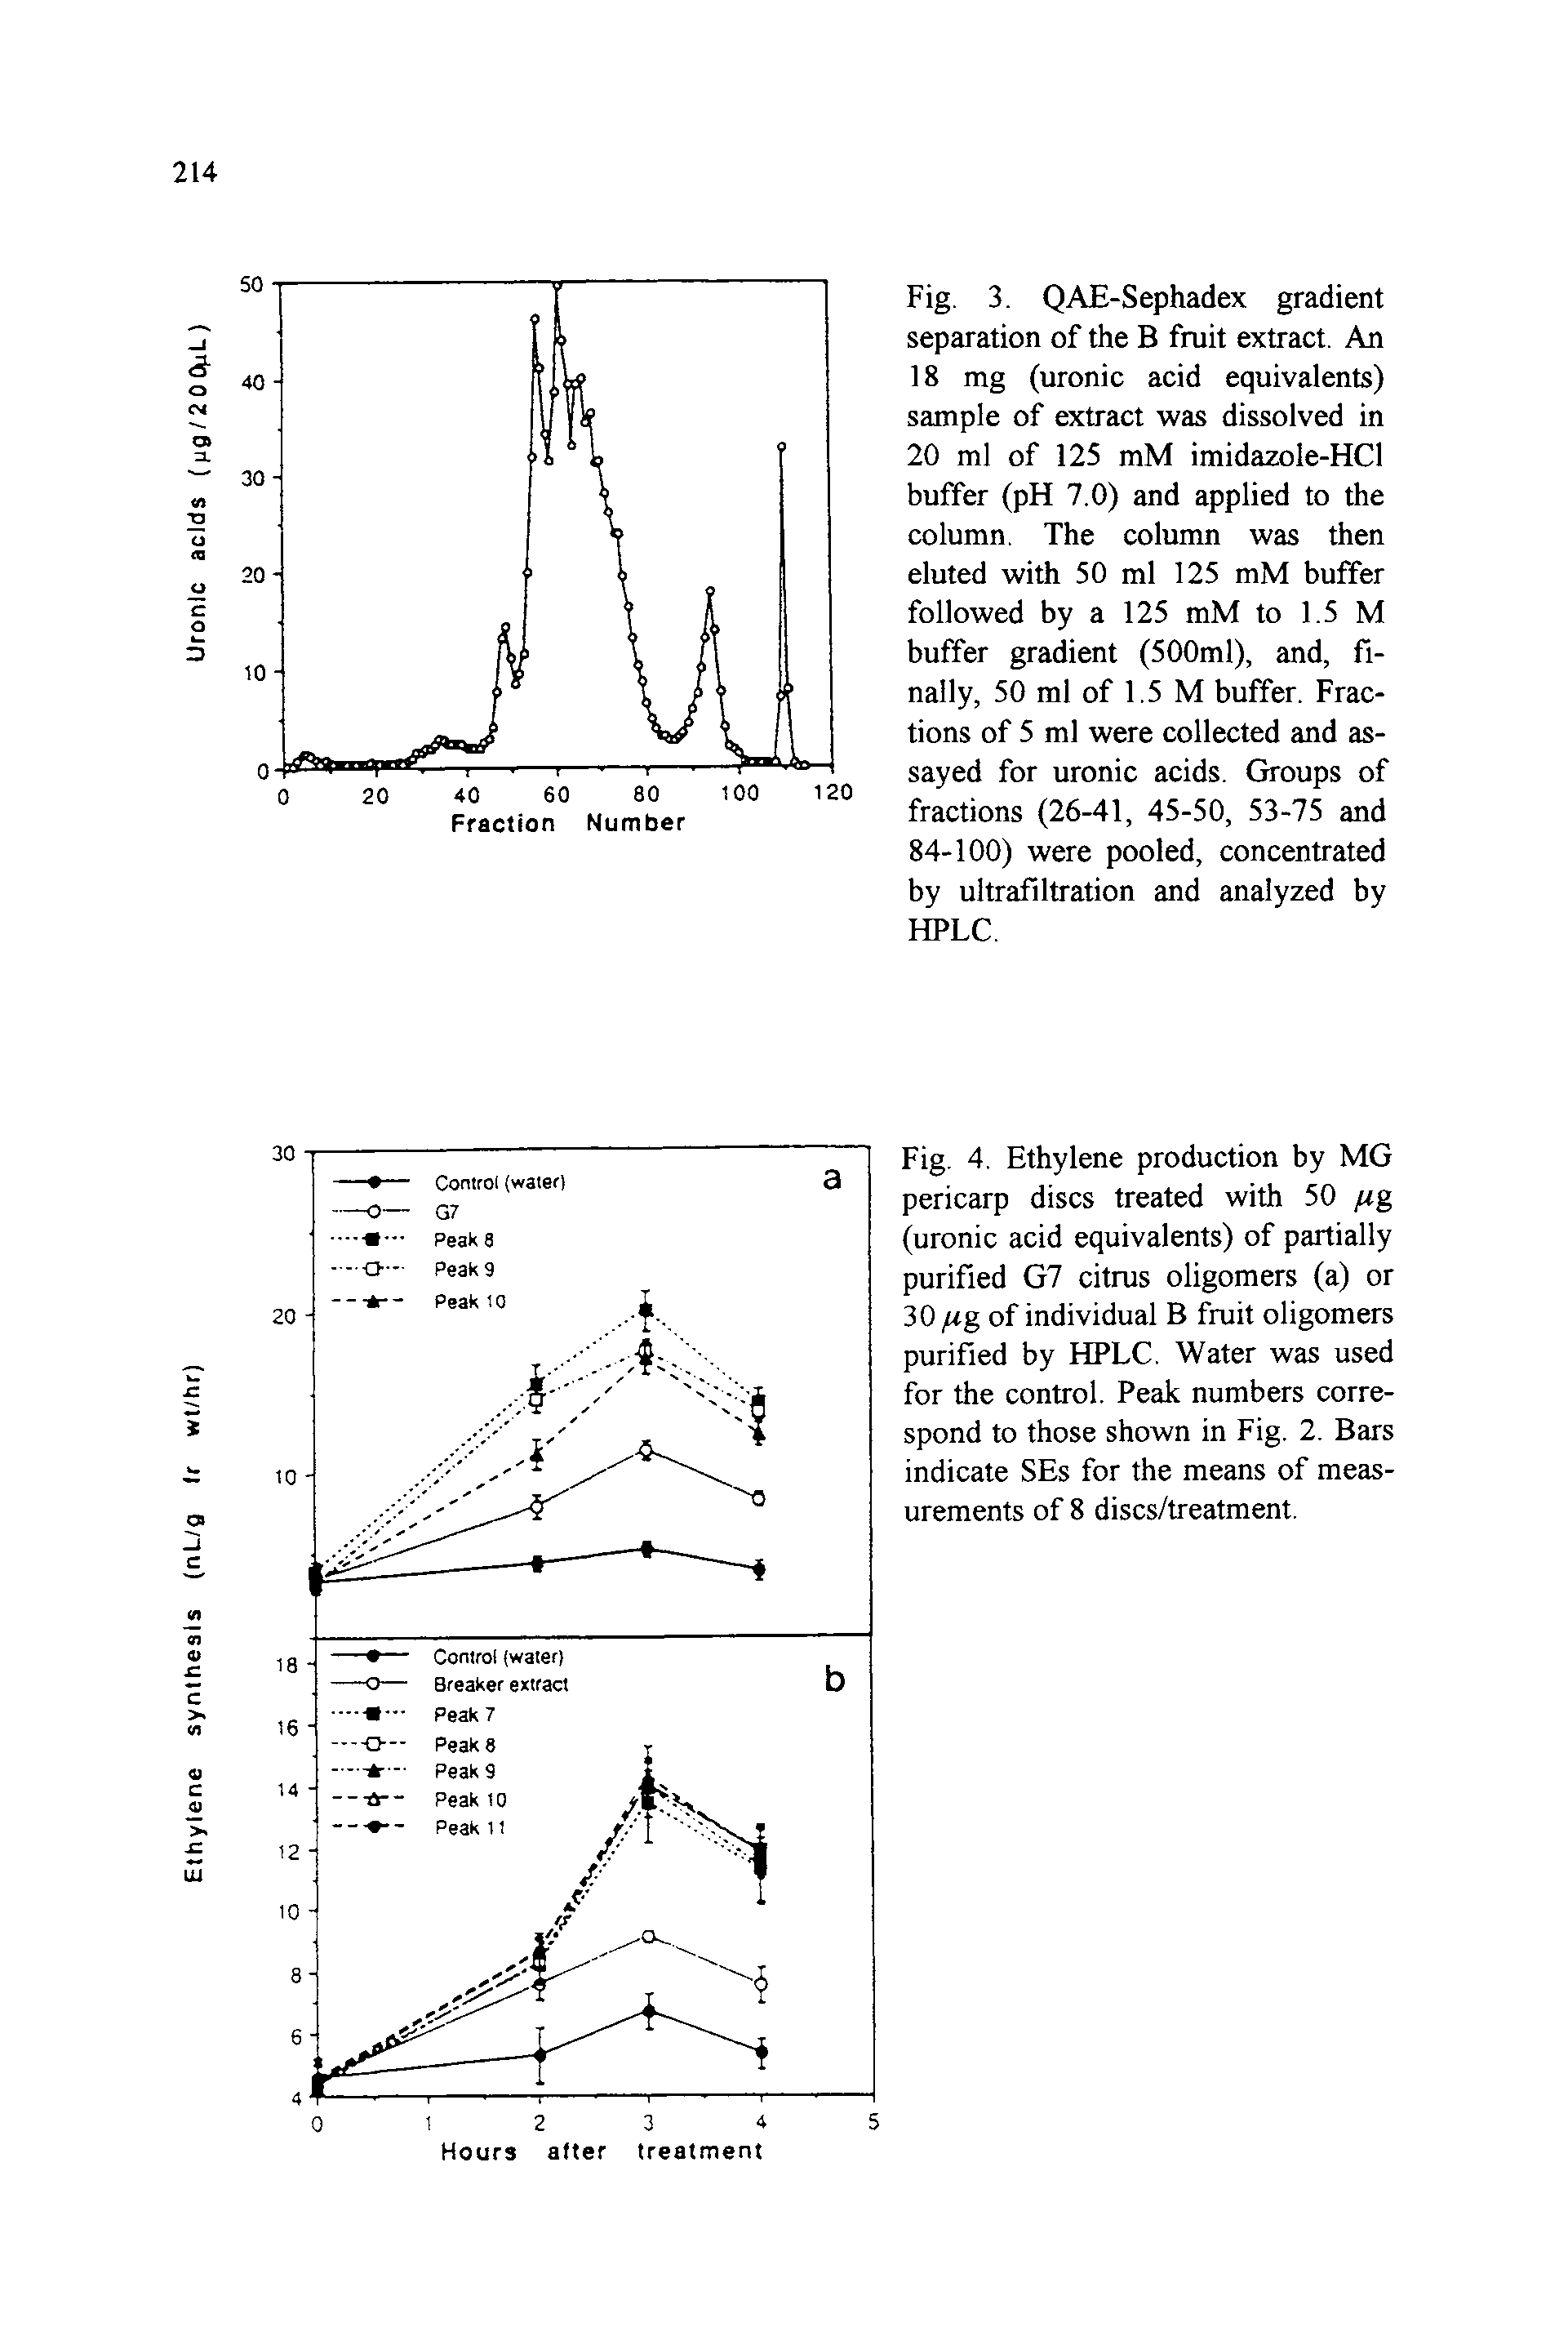 Fig. 4. Ethylene production by MG pericarp discs treated with 50 /rg (uronic acid equivalents) of partially purified G7 citrus oligomers (a) or 30 rg of individual B fruit oligomers purified by HPLC. Water was used for the control. Peak numbers correspond to those shown in Fig. 2. Bars indicate SEs for the means of measurements of 8 discs/treatment.